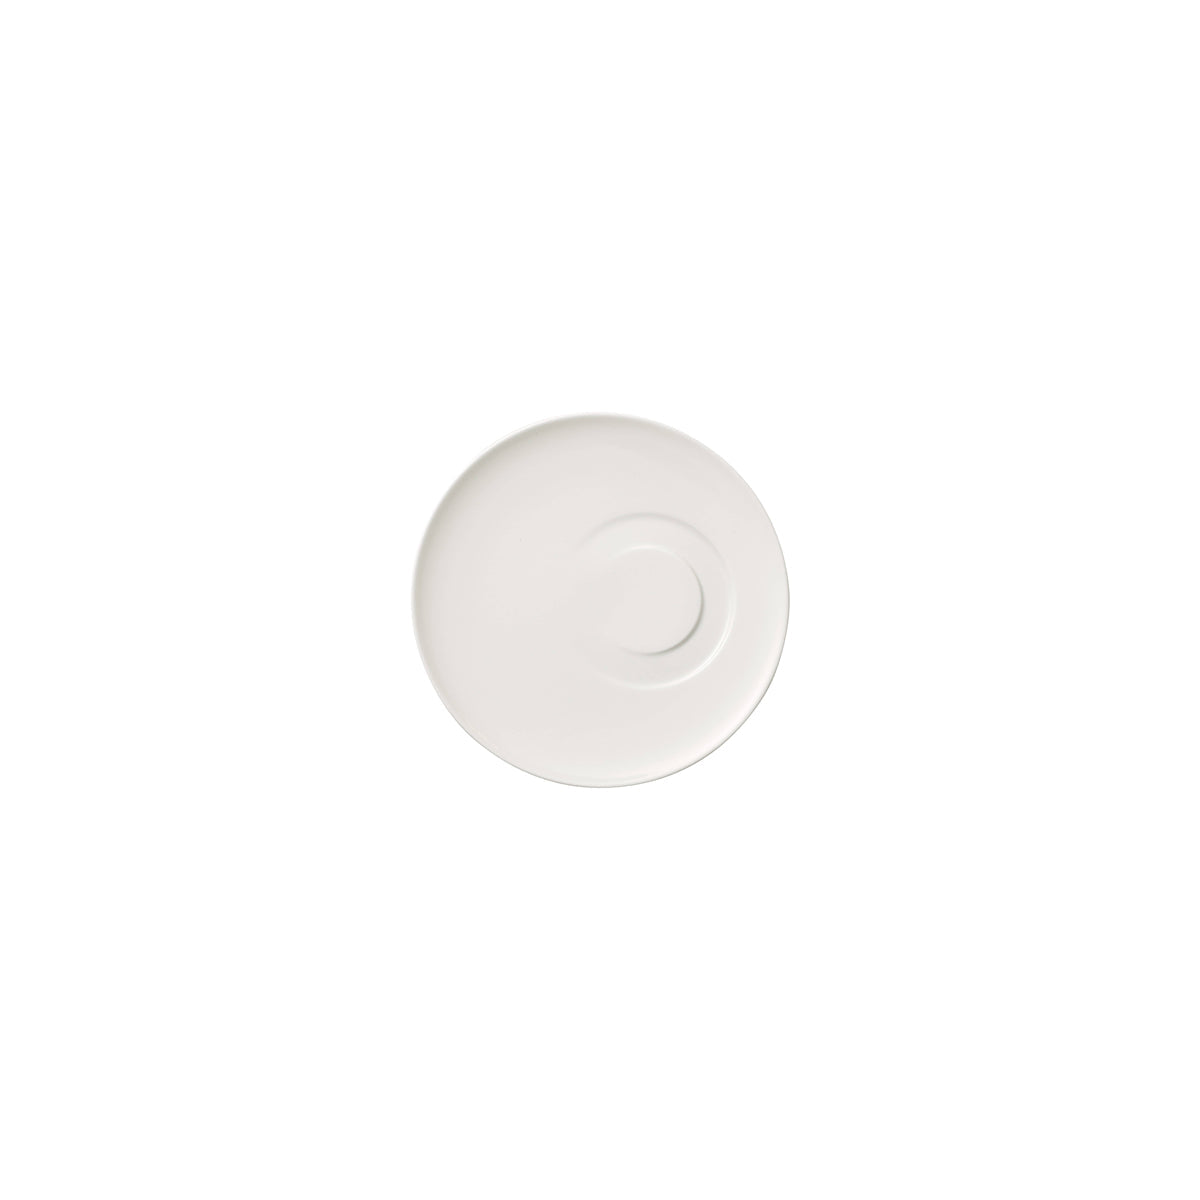 VB16-4090-1310 Villeroy And Boch Villeroy And Boch Stella Cosmo White Saucer 185x20mm Tomkin Australia Hospitality Supplies